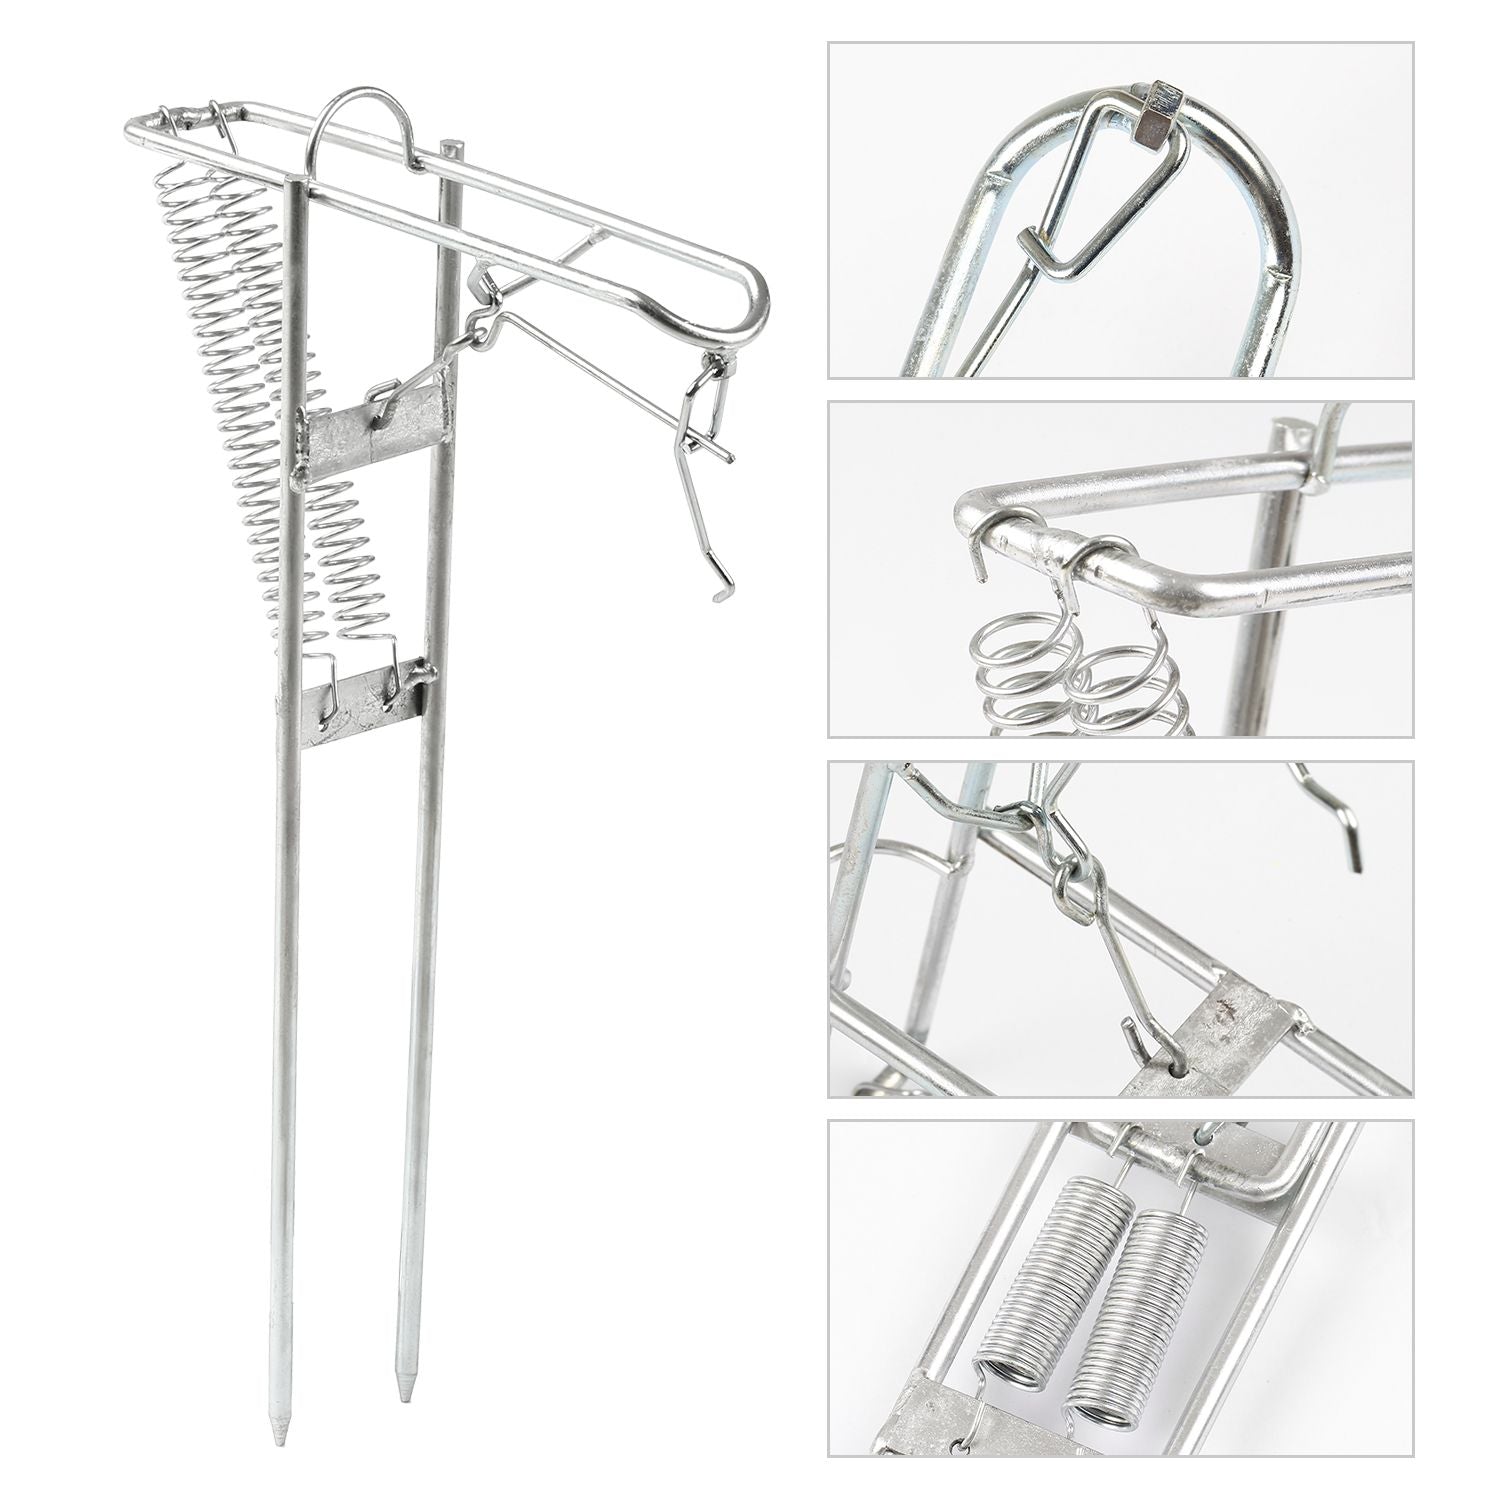 Foldable Automatic Fishing Rod Holder Stainless Steel